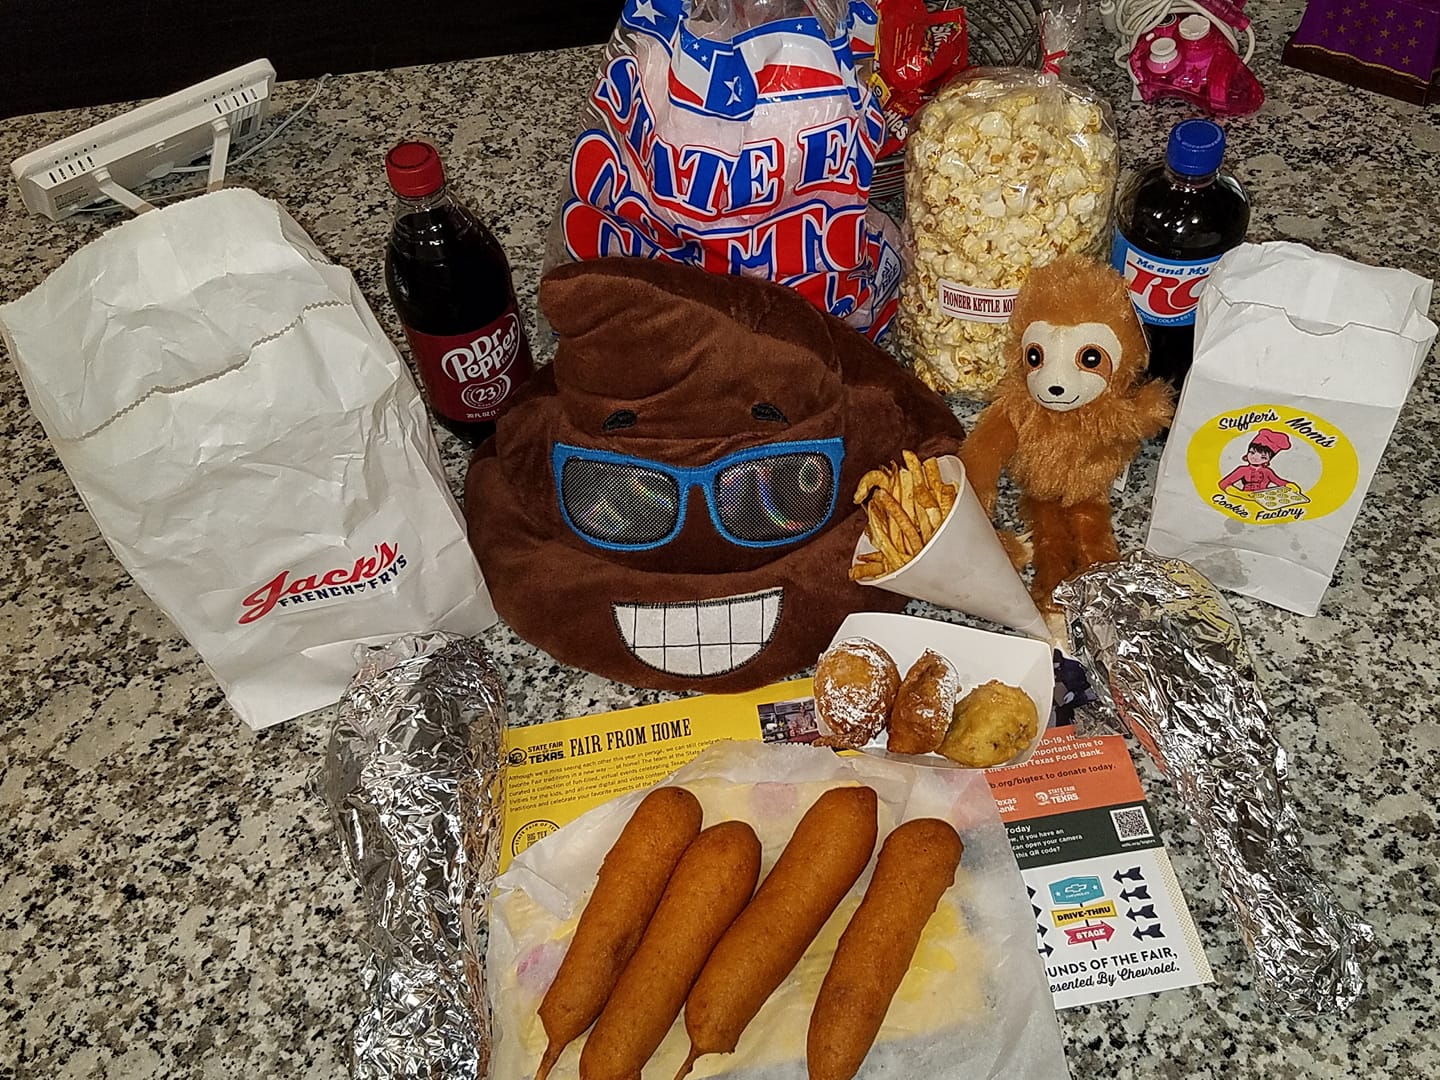 State Fair of Texas food & midway prizes